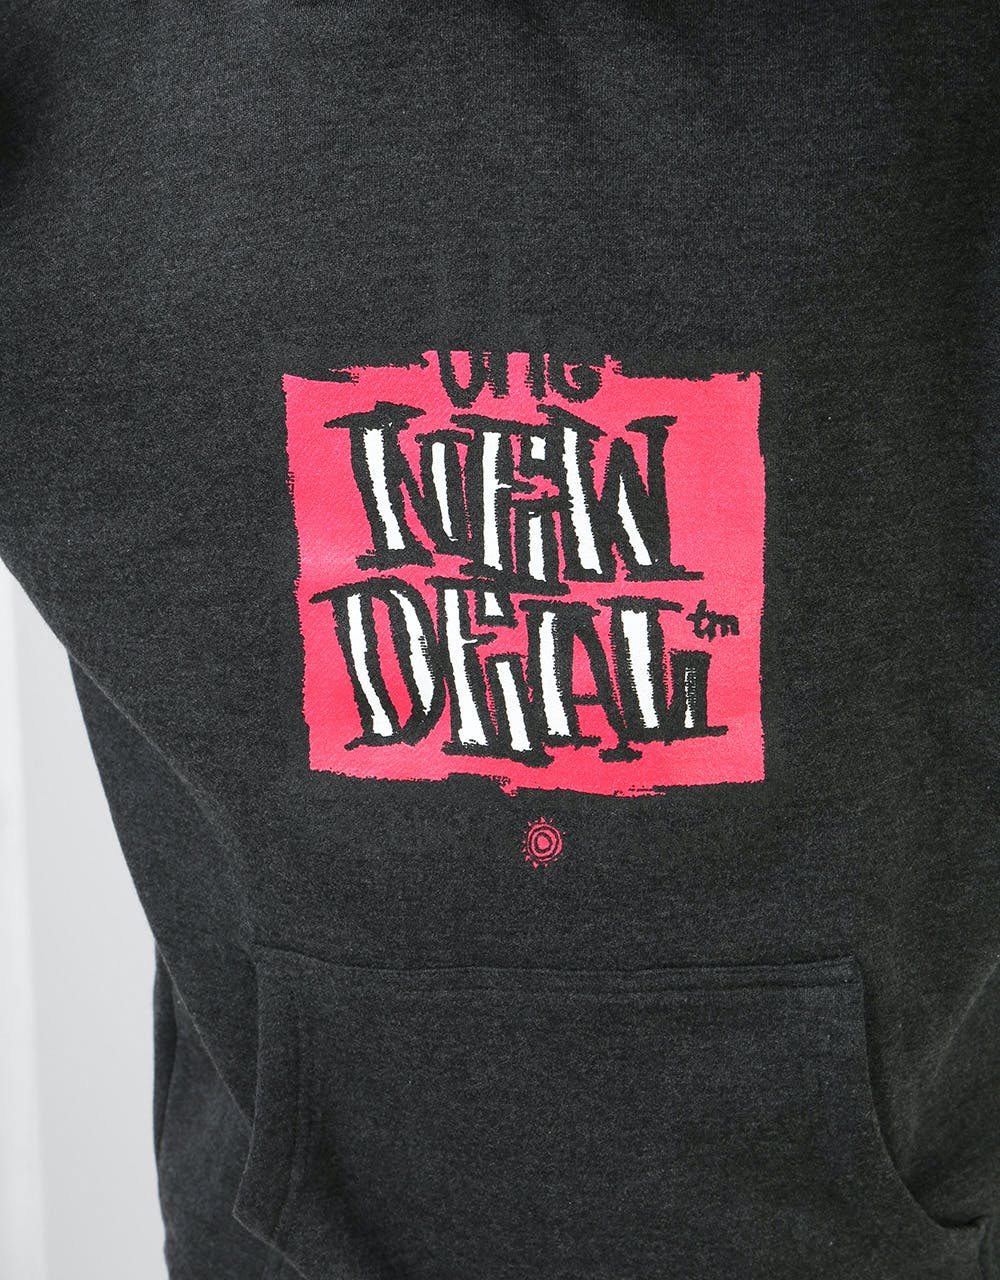 The New Deal Original Napkin Logo Pullover Hoodie - Charcoal Heather